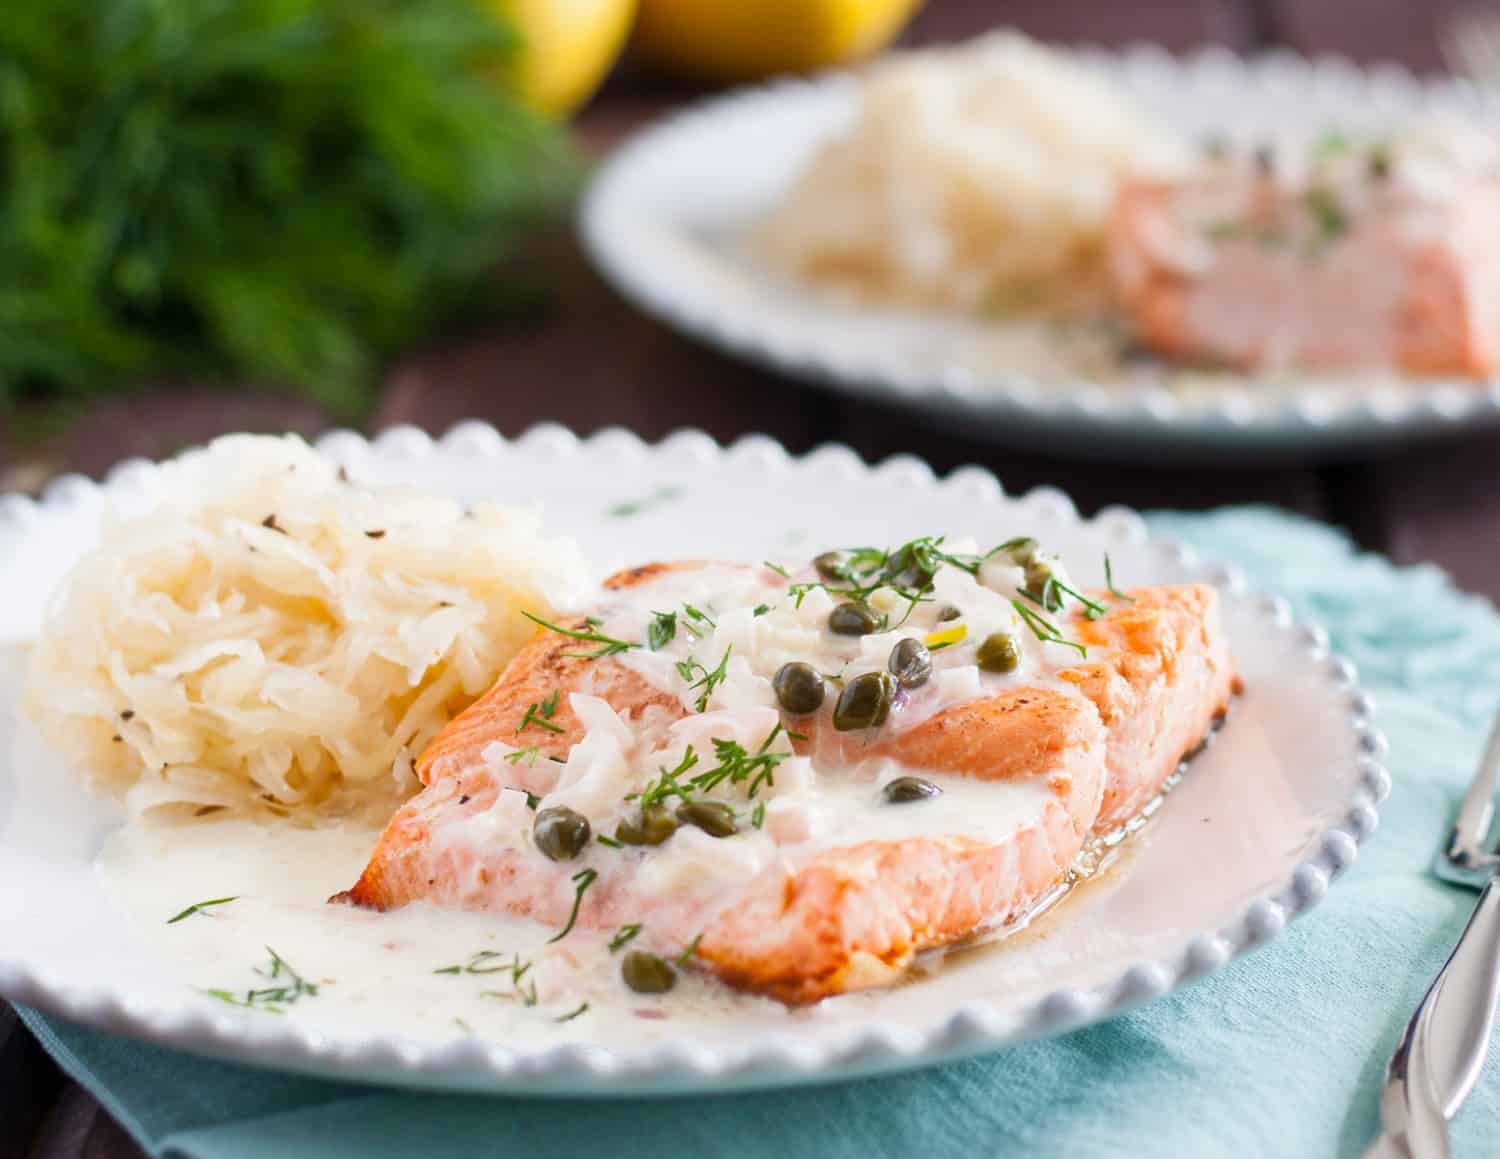 Alsatian Salmon Recipe - Give your staycation a French spin with this easy dish! * Recipe on GoodieGodmother.com